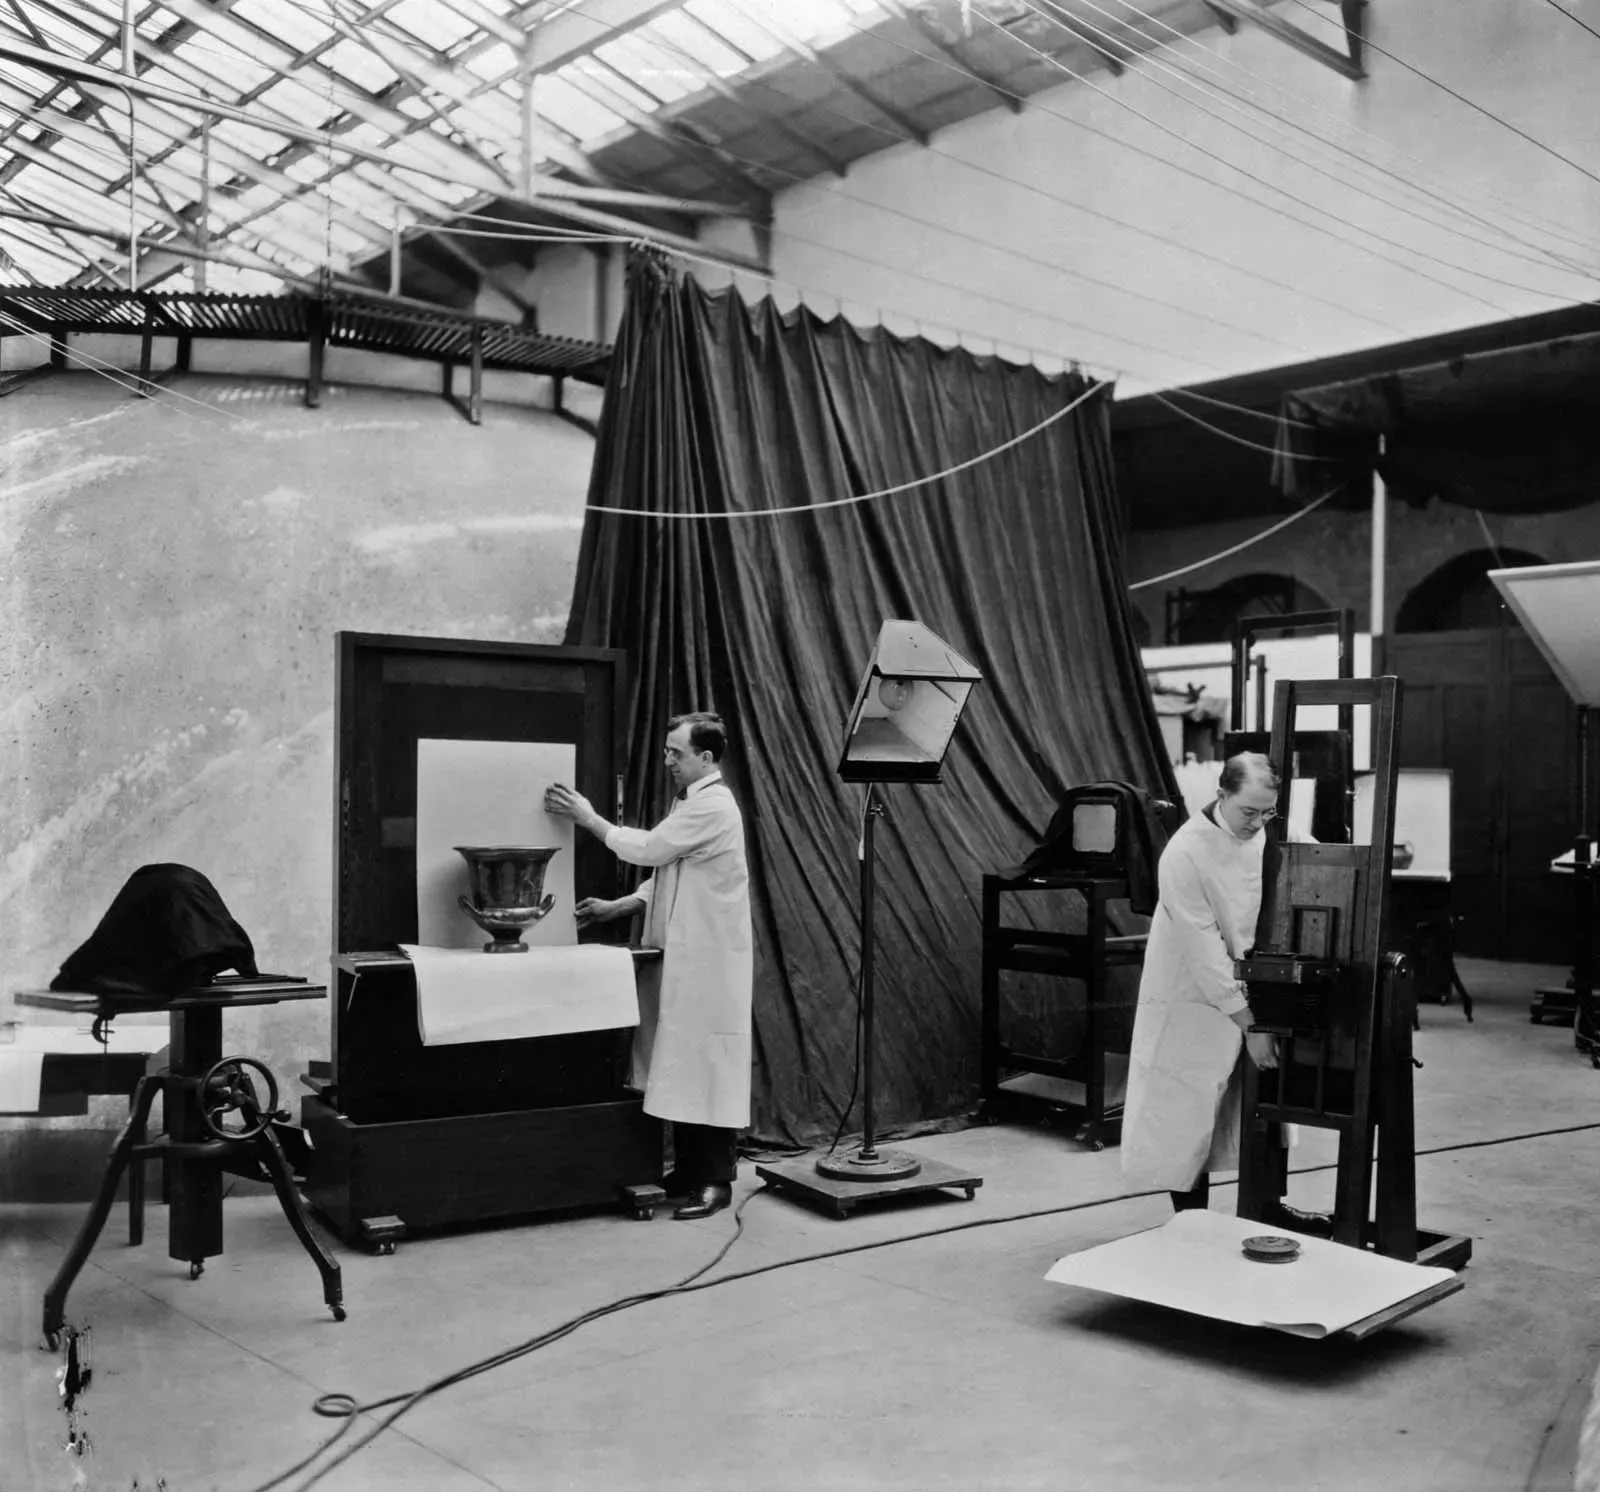 Figure 5 - Copy of 1924 photograph of photographers at work in the ‘operating room’ (in the High Attic), The Metropolitan Museum of Art. Museum reference #: MM1029B. Photographer: not recorded.